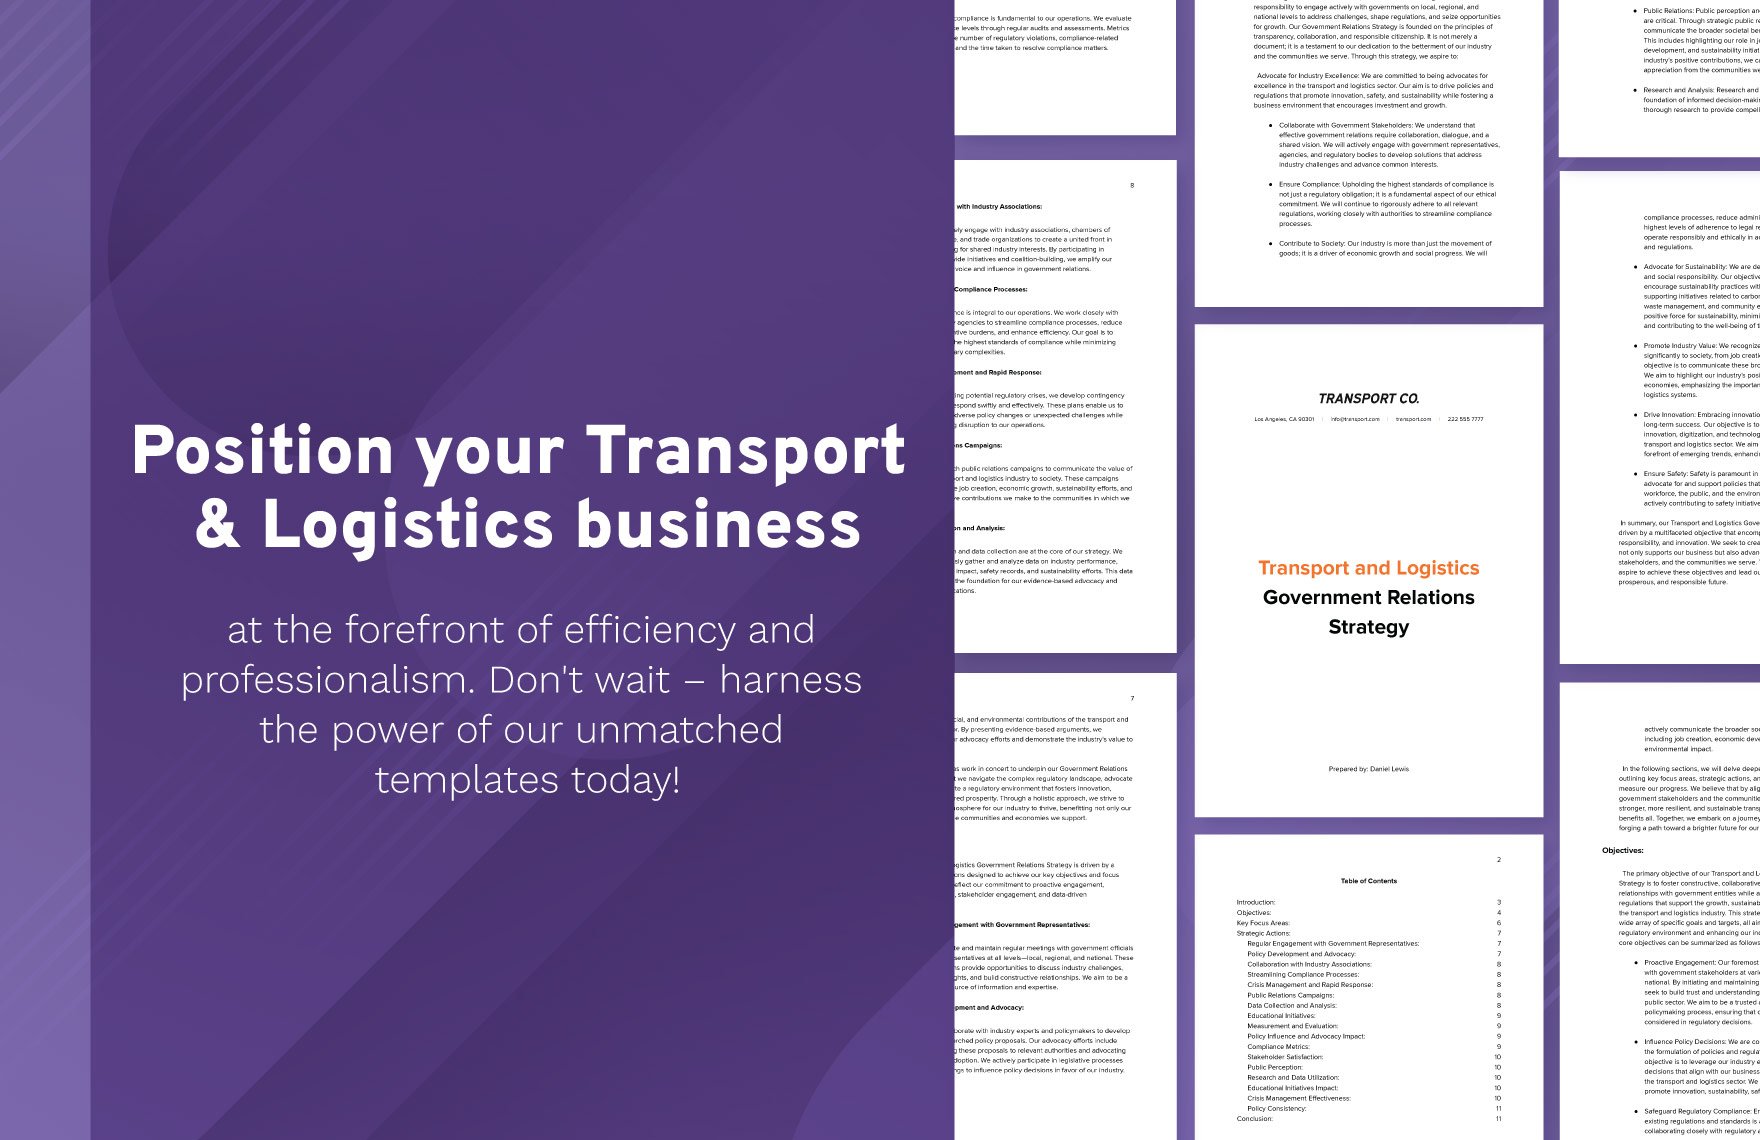 Transport and Logistics Government Relations Strategy Template